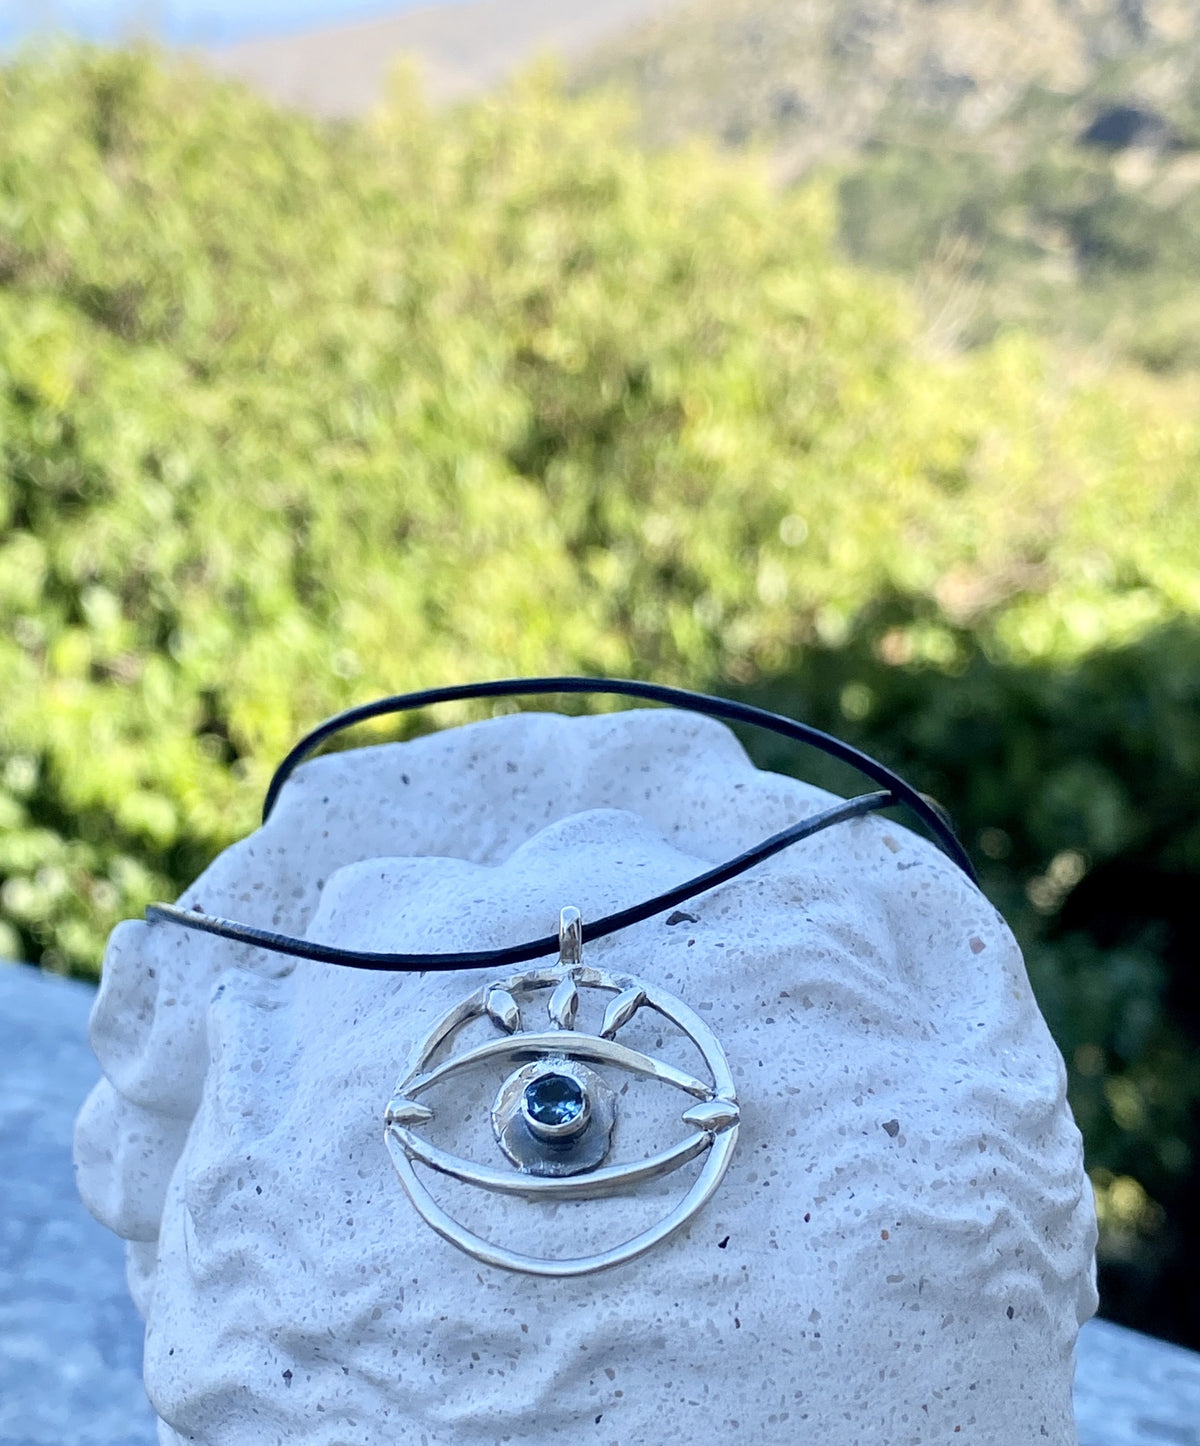 Evil eye necklace with blue gemstone and leather cord